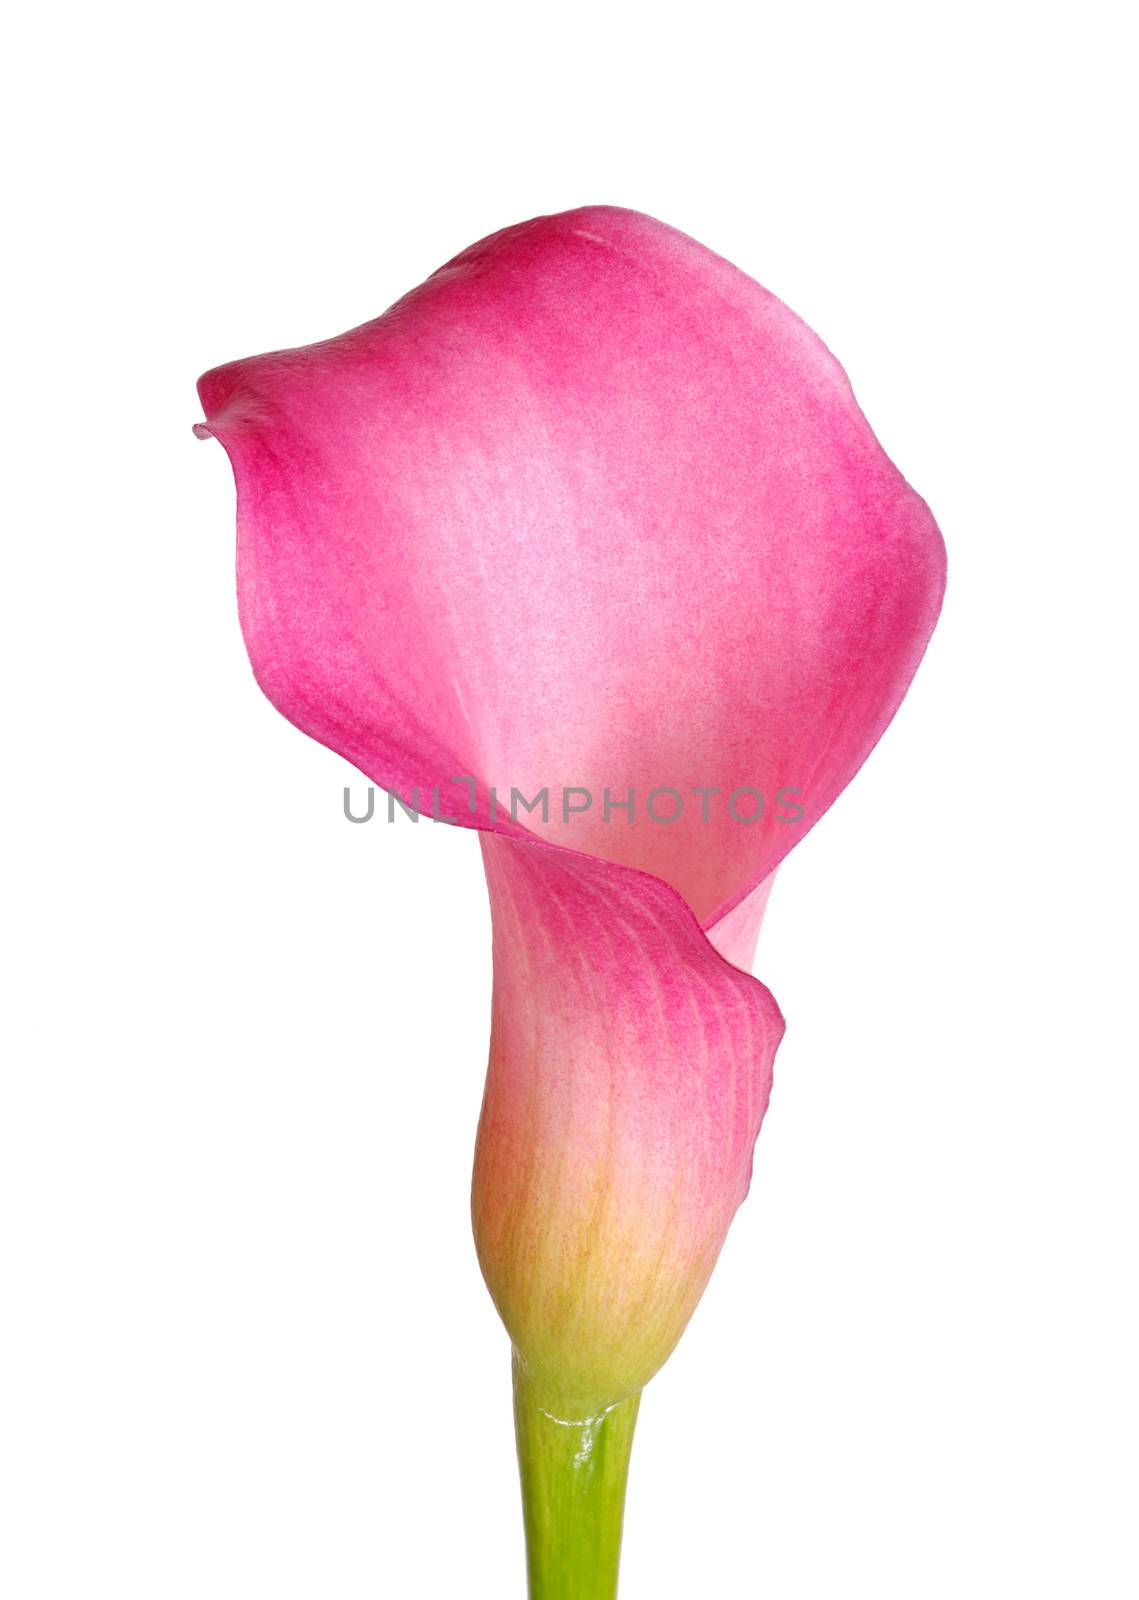 Single flower of a pink calla lily (Zantedeschia hybrid) isolated against a white background